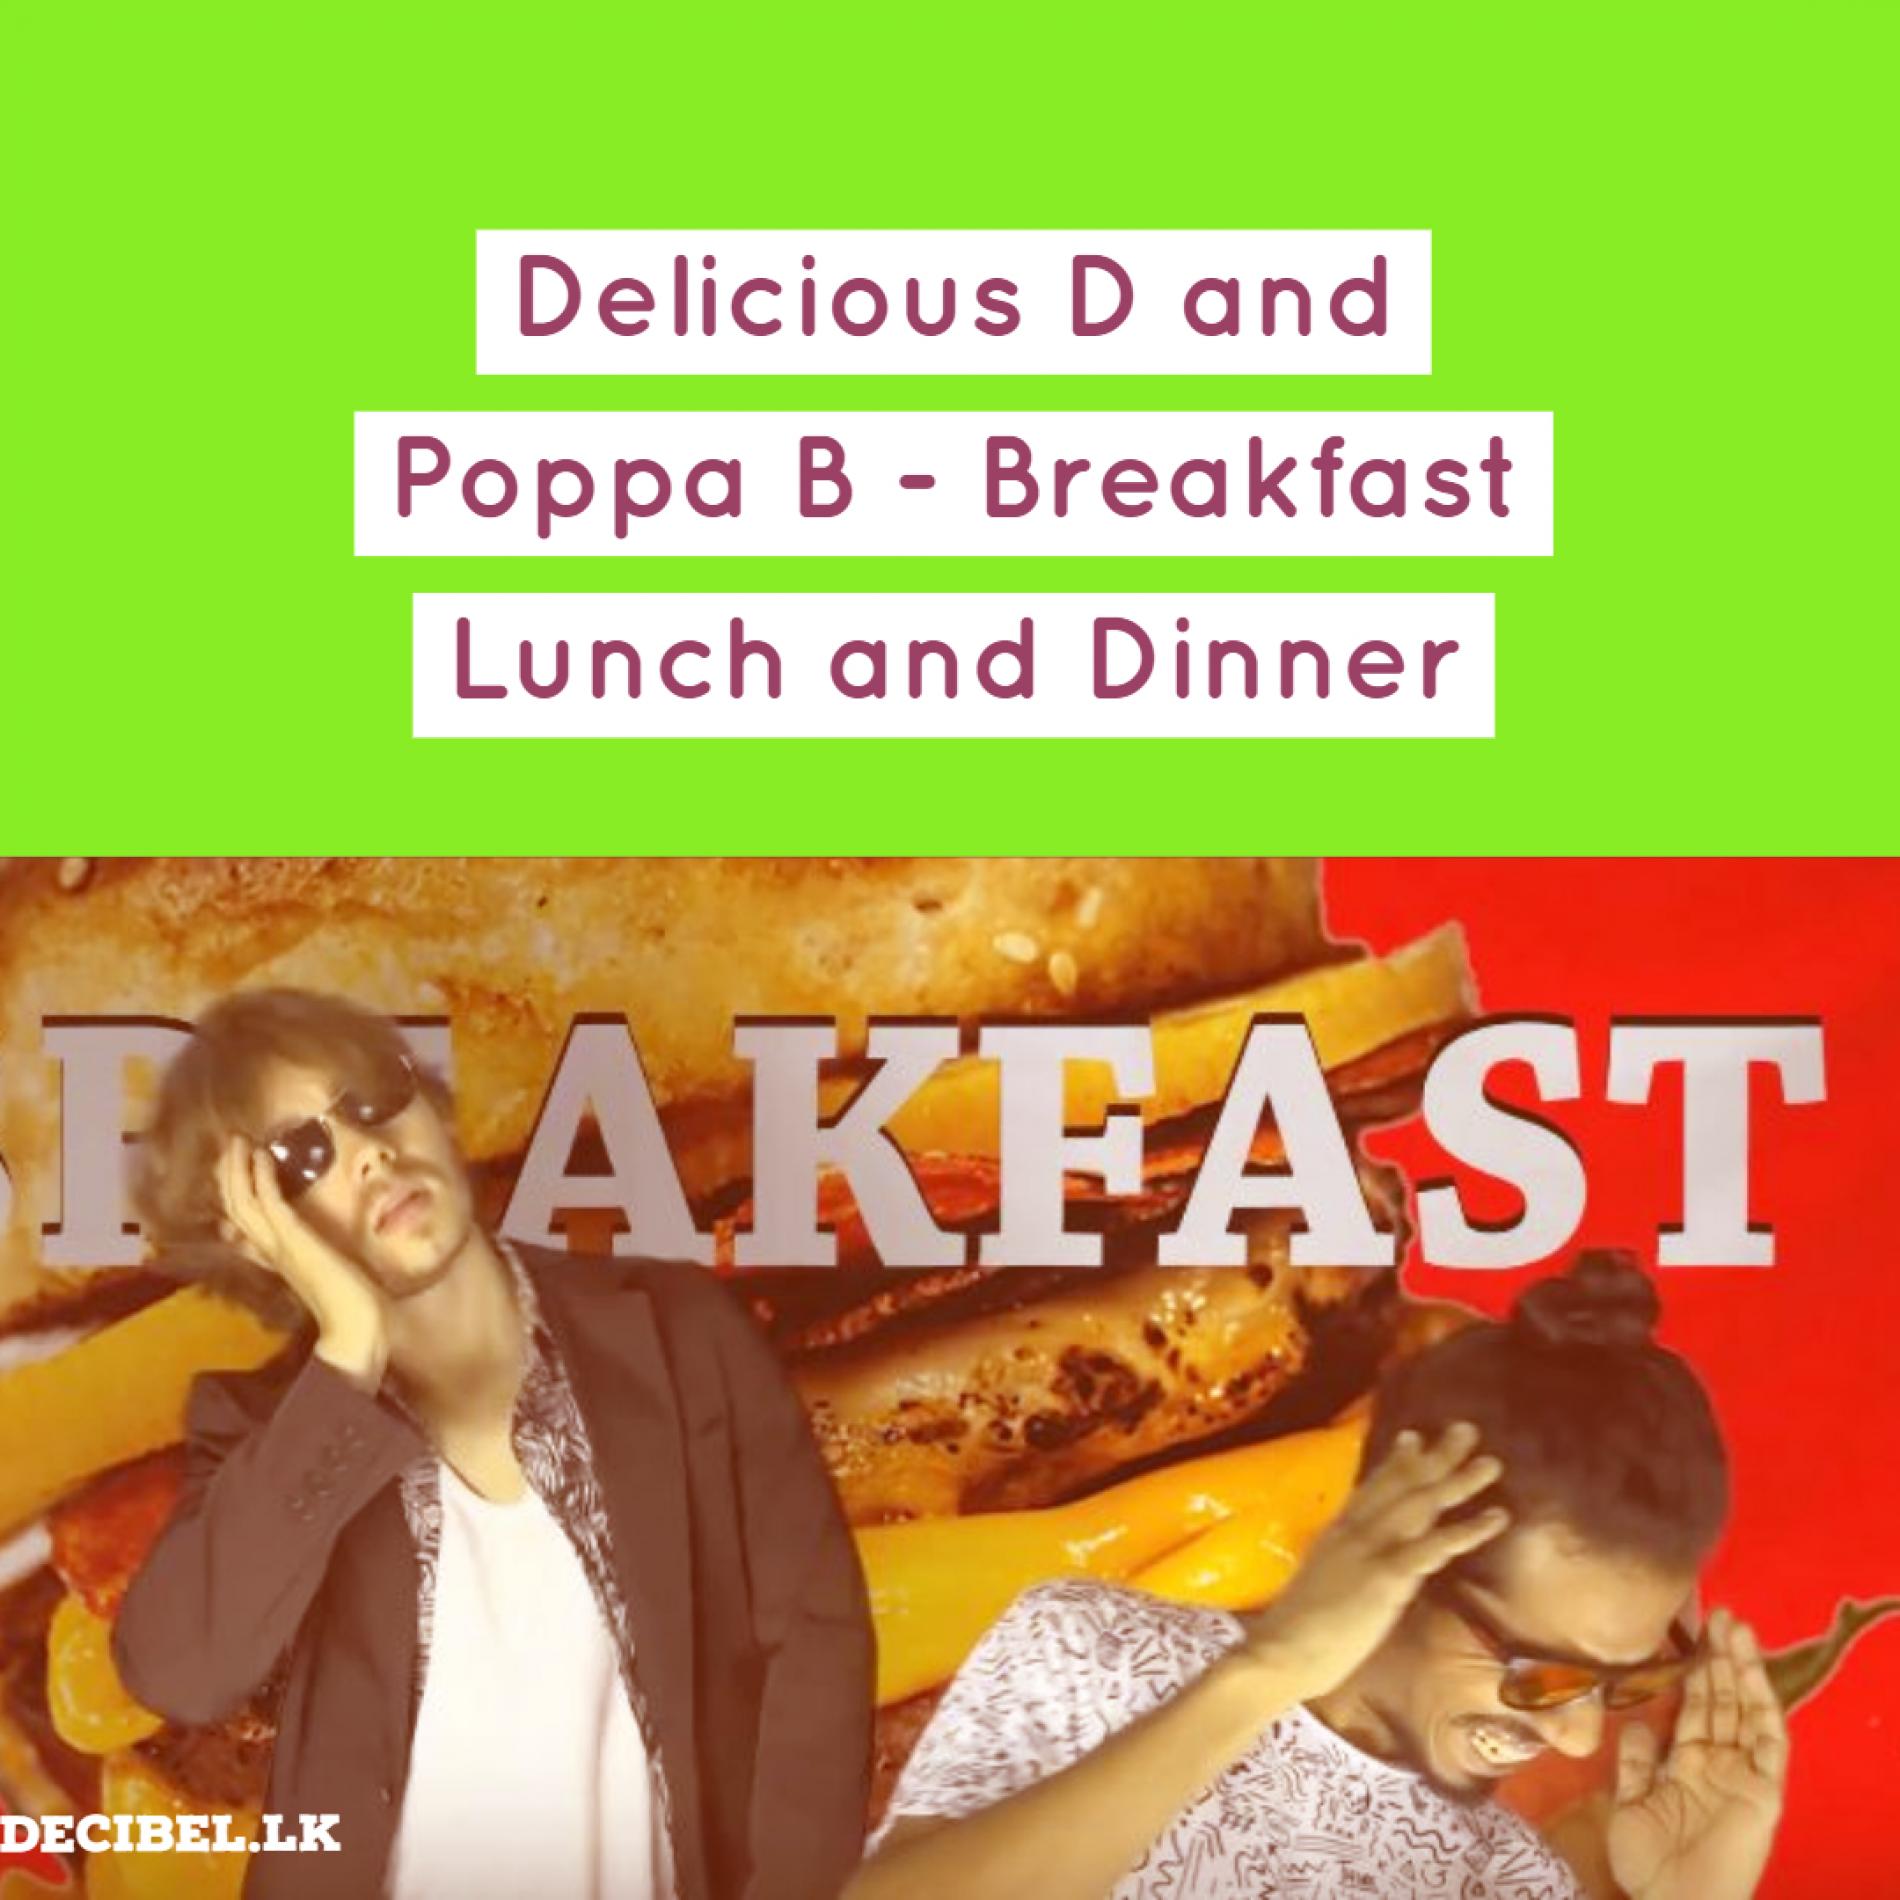 Delicious D and Poppa B – Breakfast Lunch and Dinner